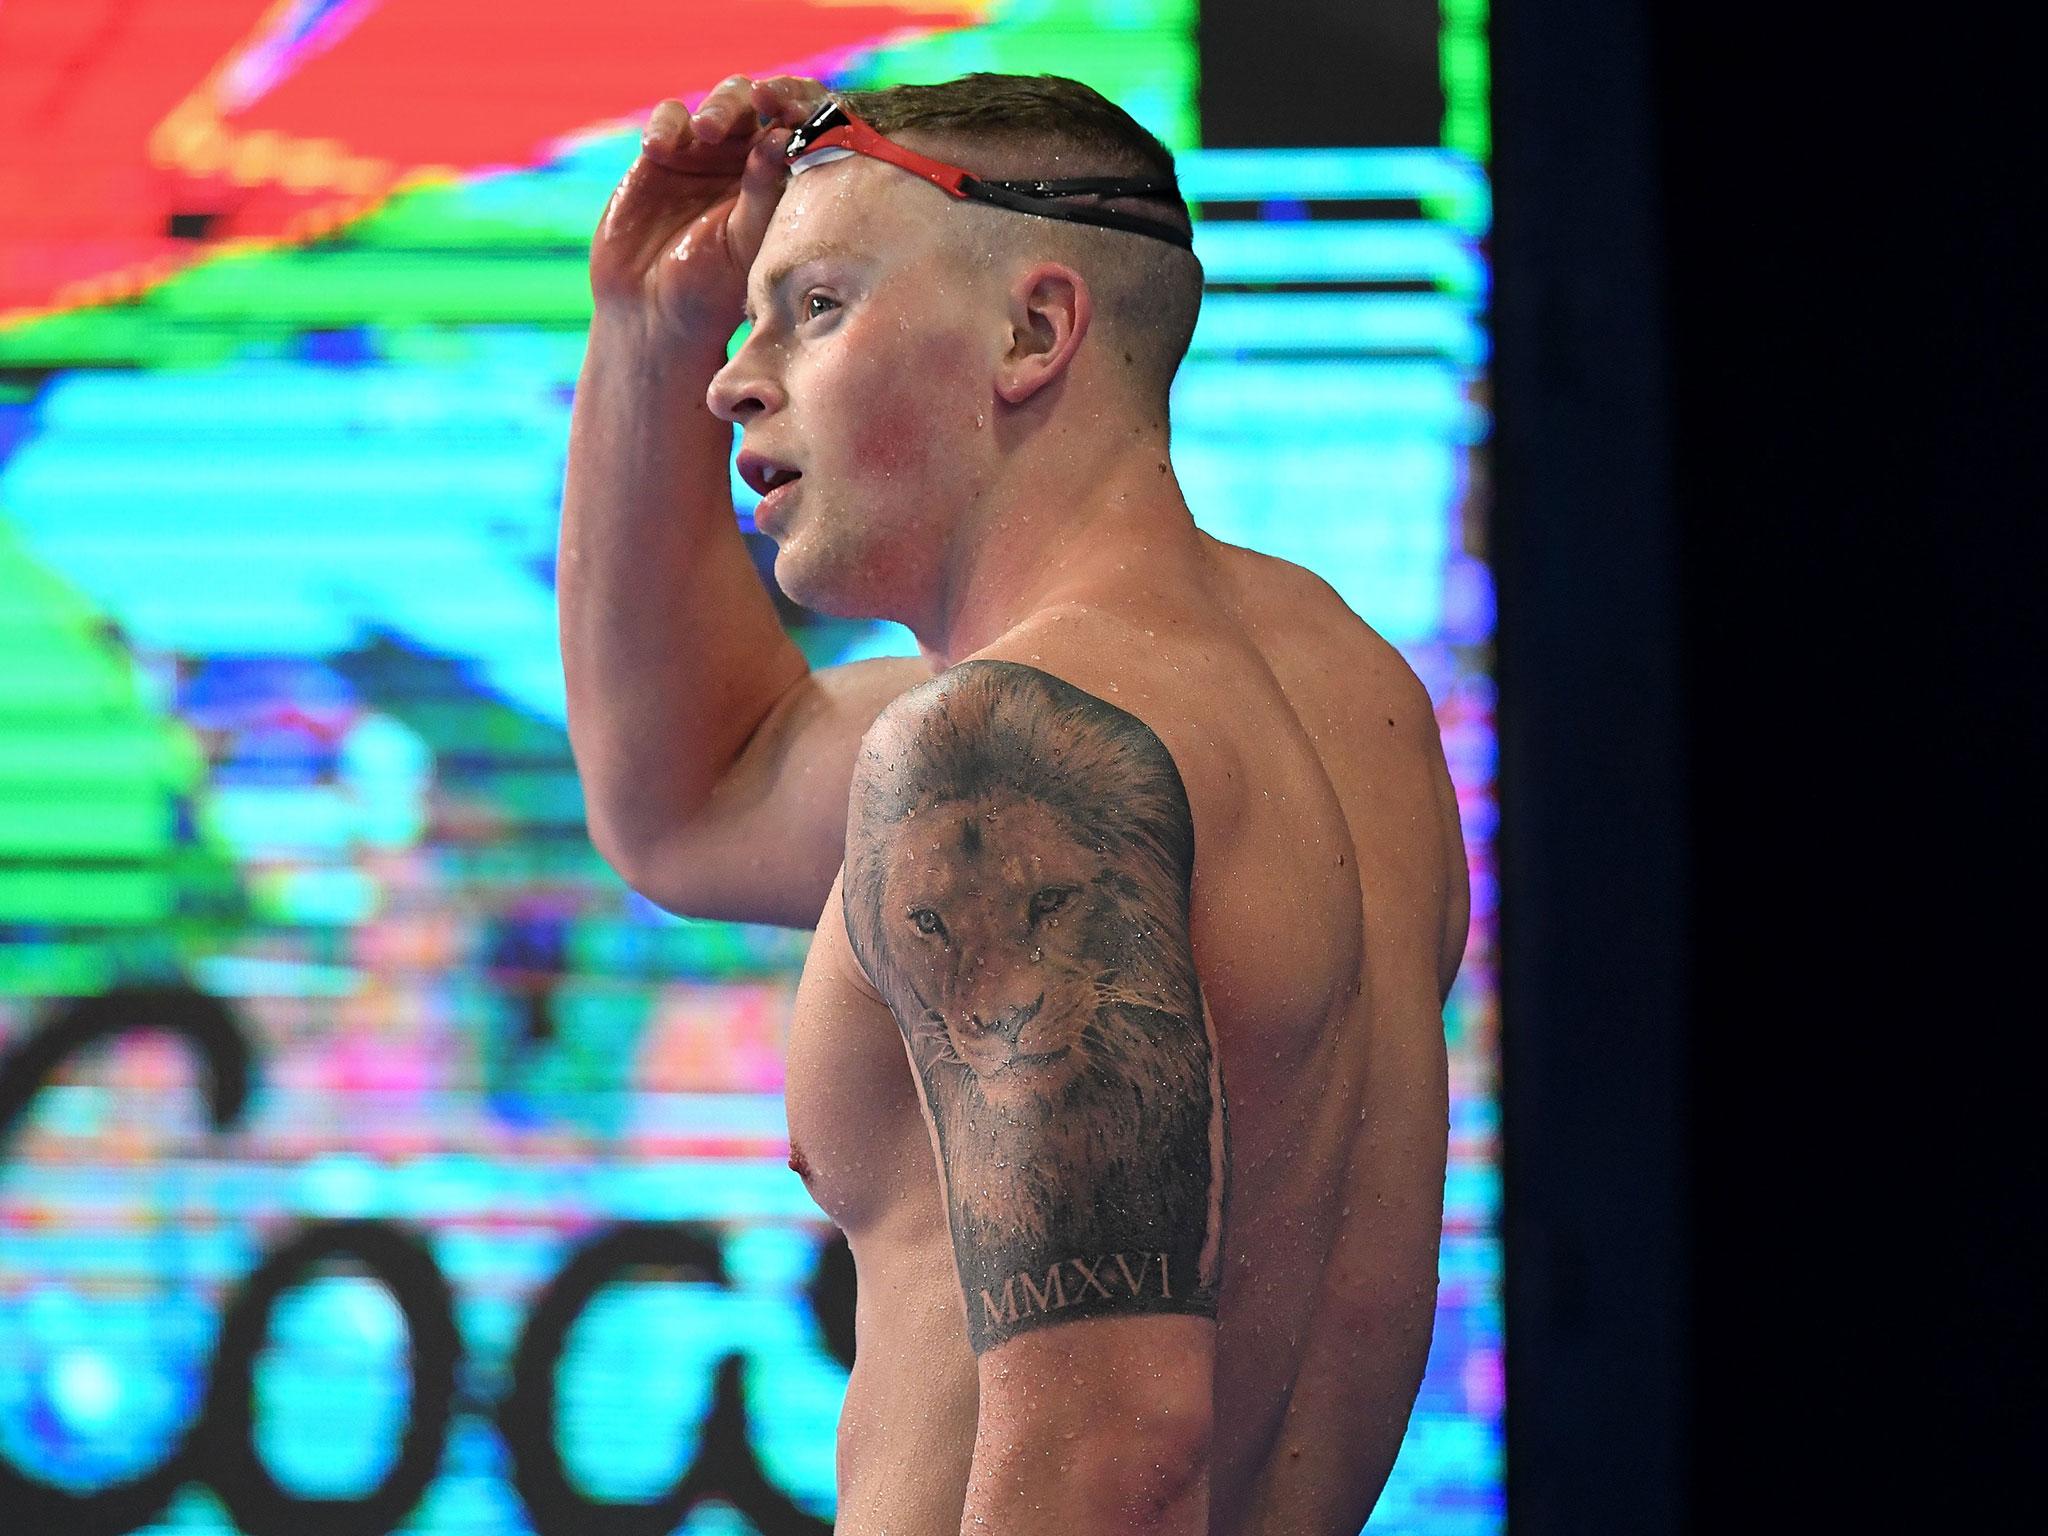 Peaty was bidding to triumph in the one-length dash for the first time at the Commonwealth Games